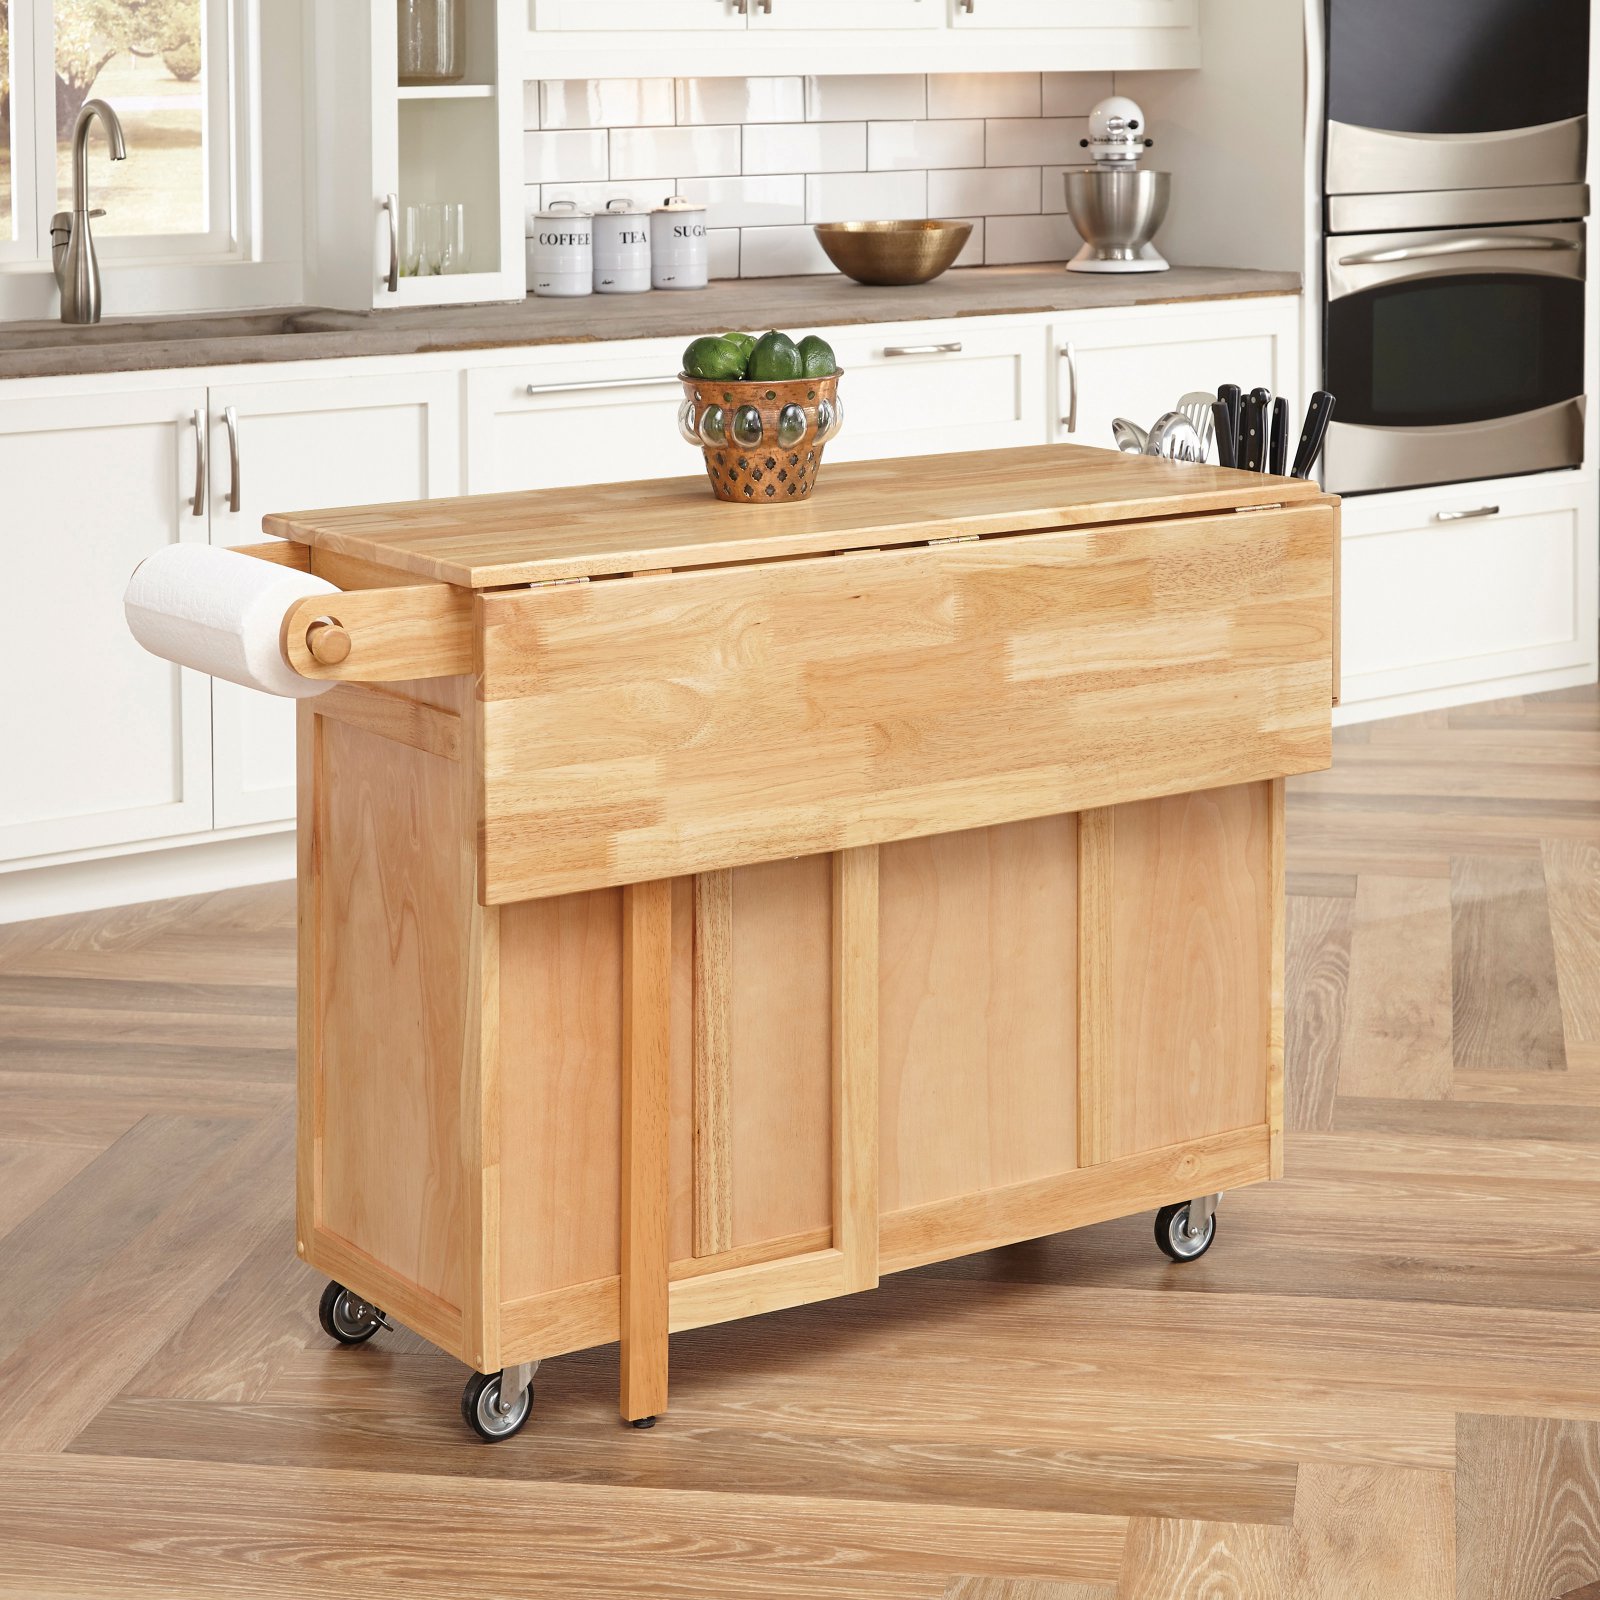 Homestyles General Line Wood Rolling Kitchen Cart in Brown - image 3 of 5